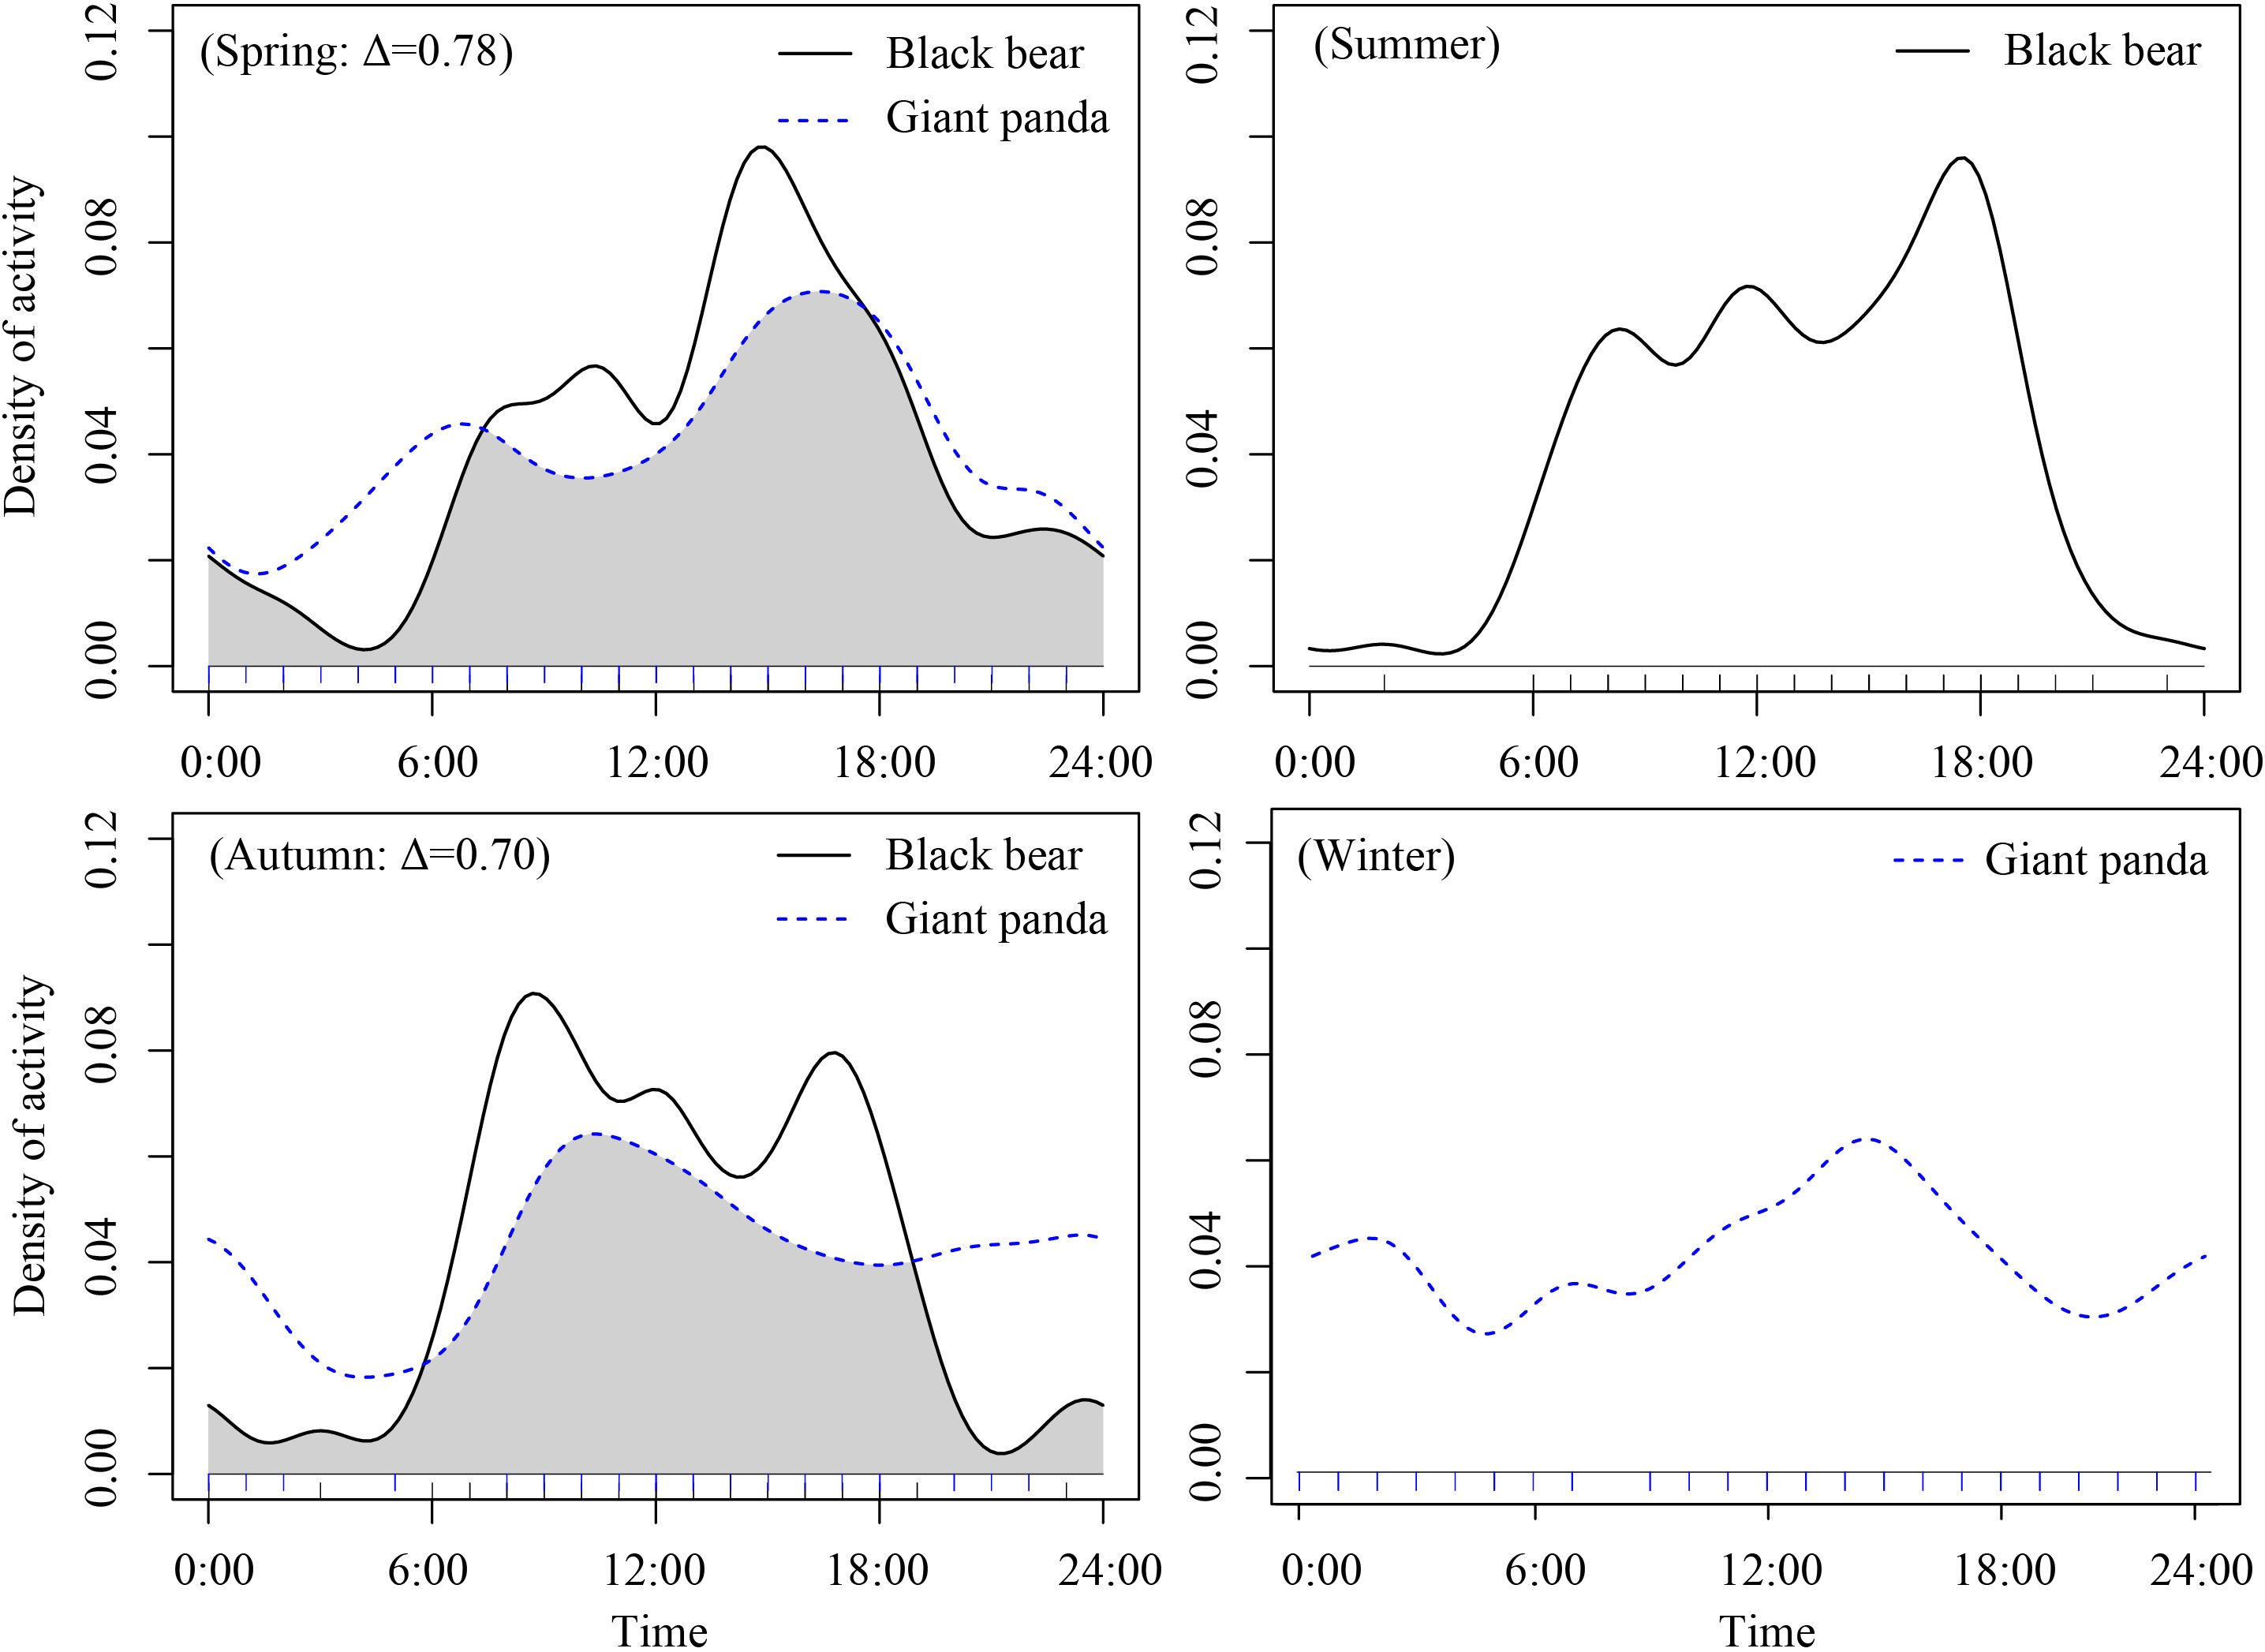 Frontiers  Coexistence patterns of sympatric giant pandas